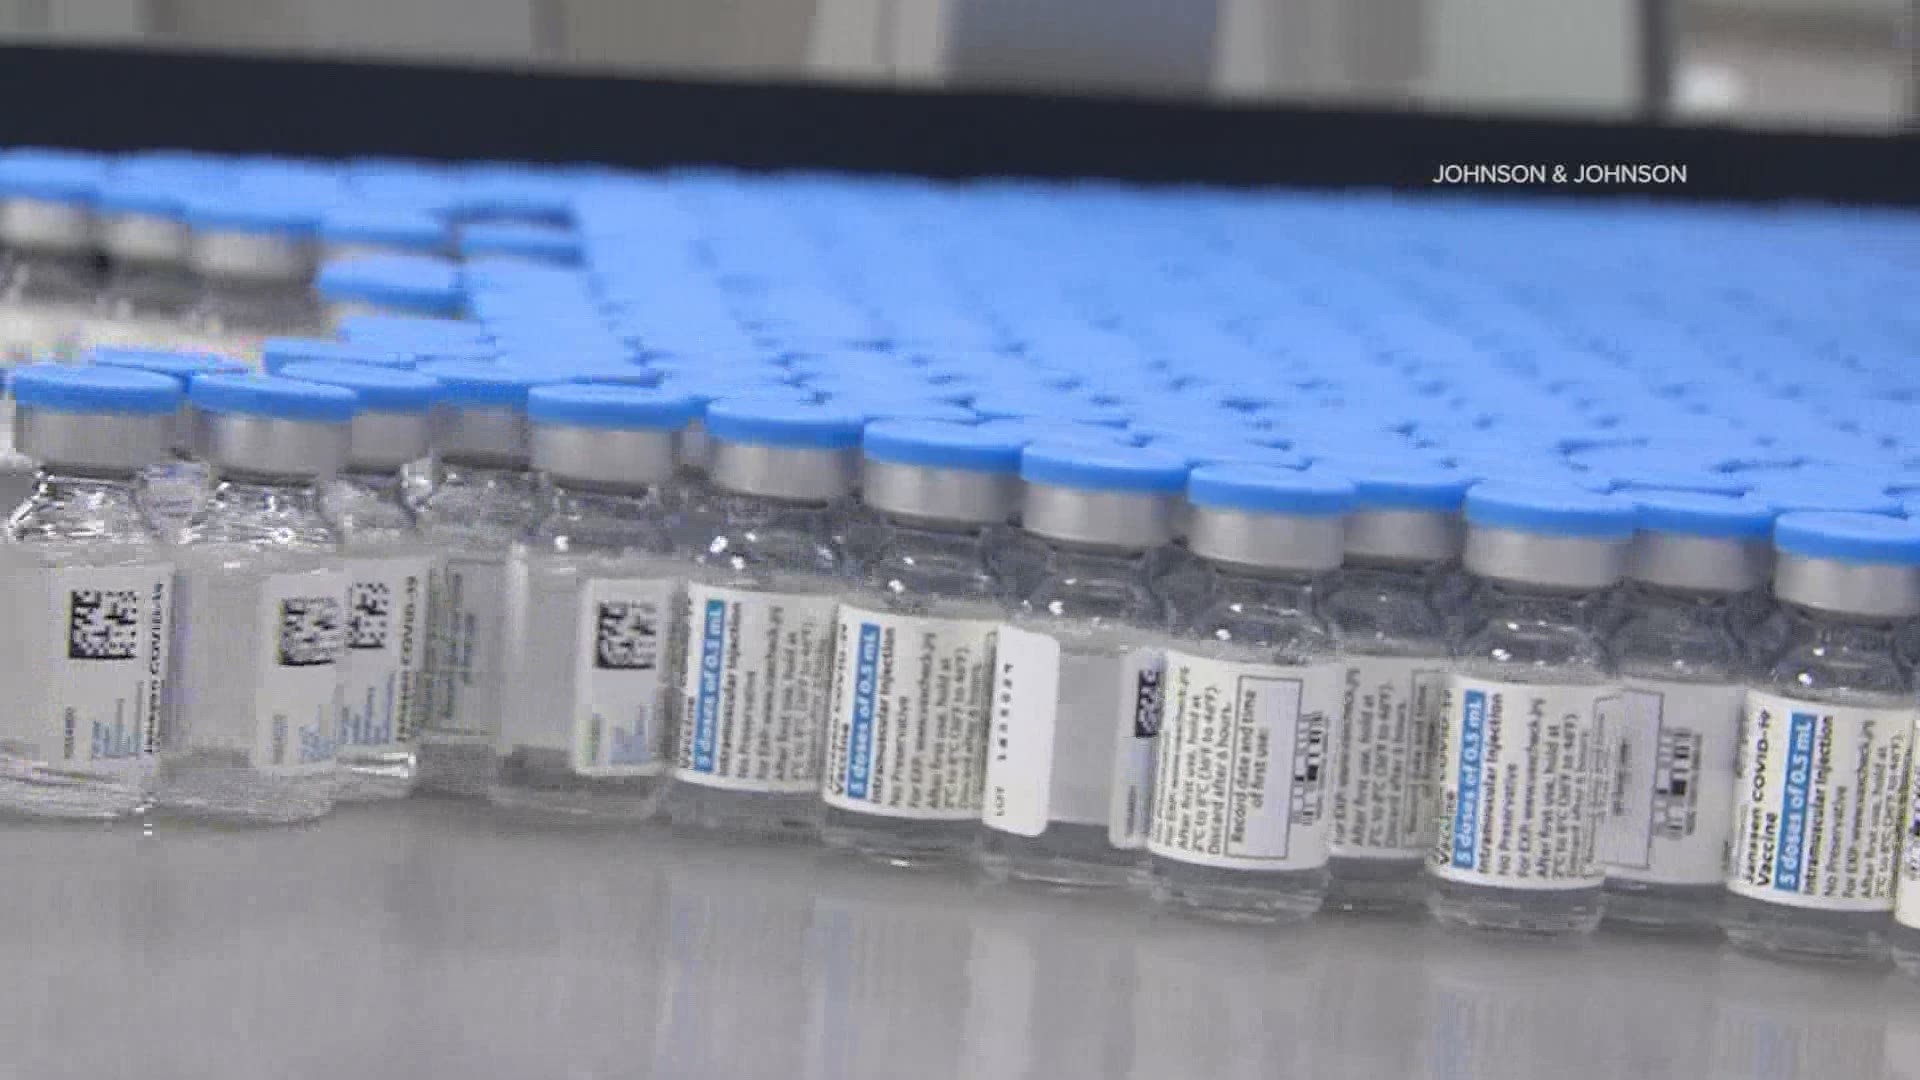 Vaccine eligibility has been open to those age 16 and up for almost three weeks now.  Which age groups in Maine have been getting their shots the fastest?